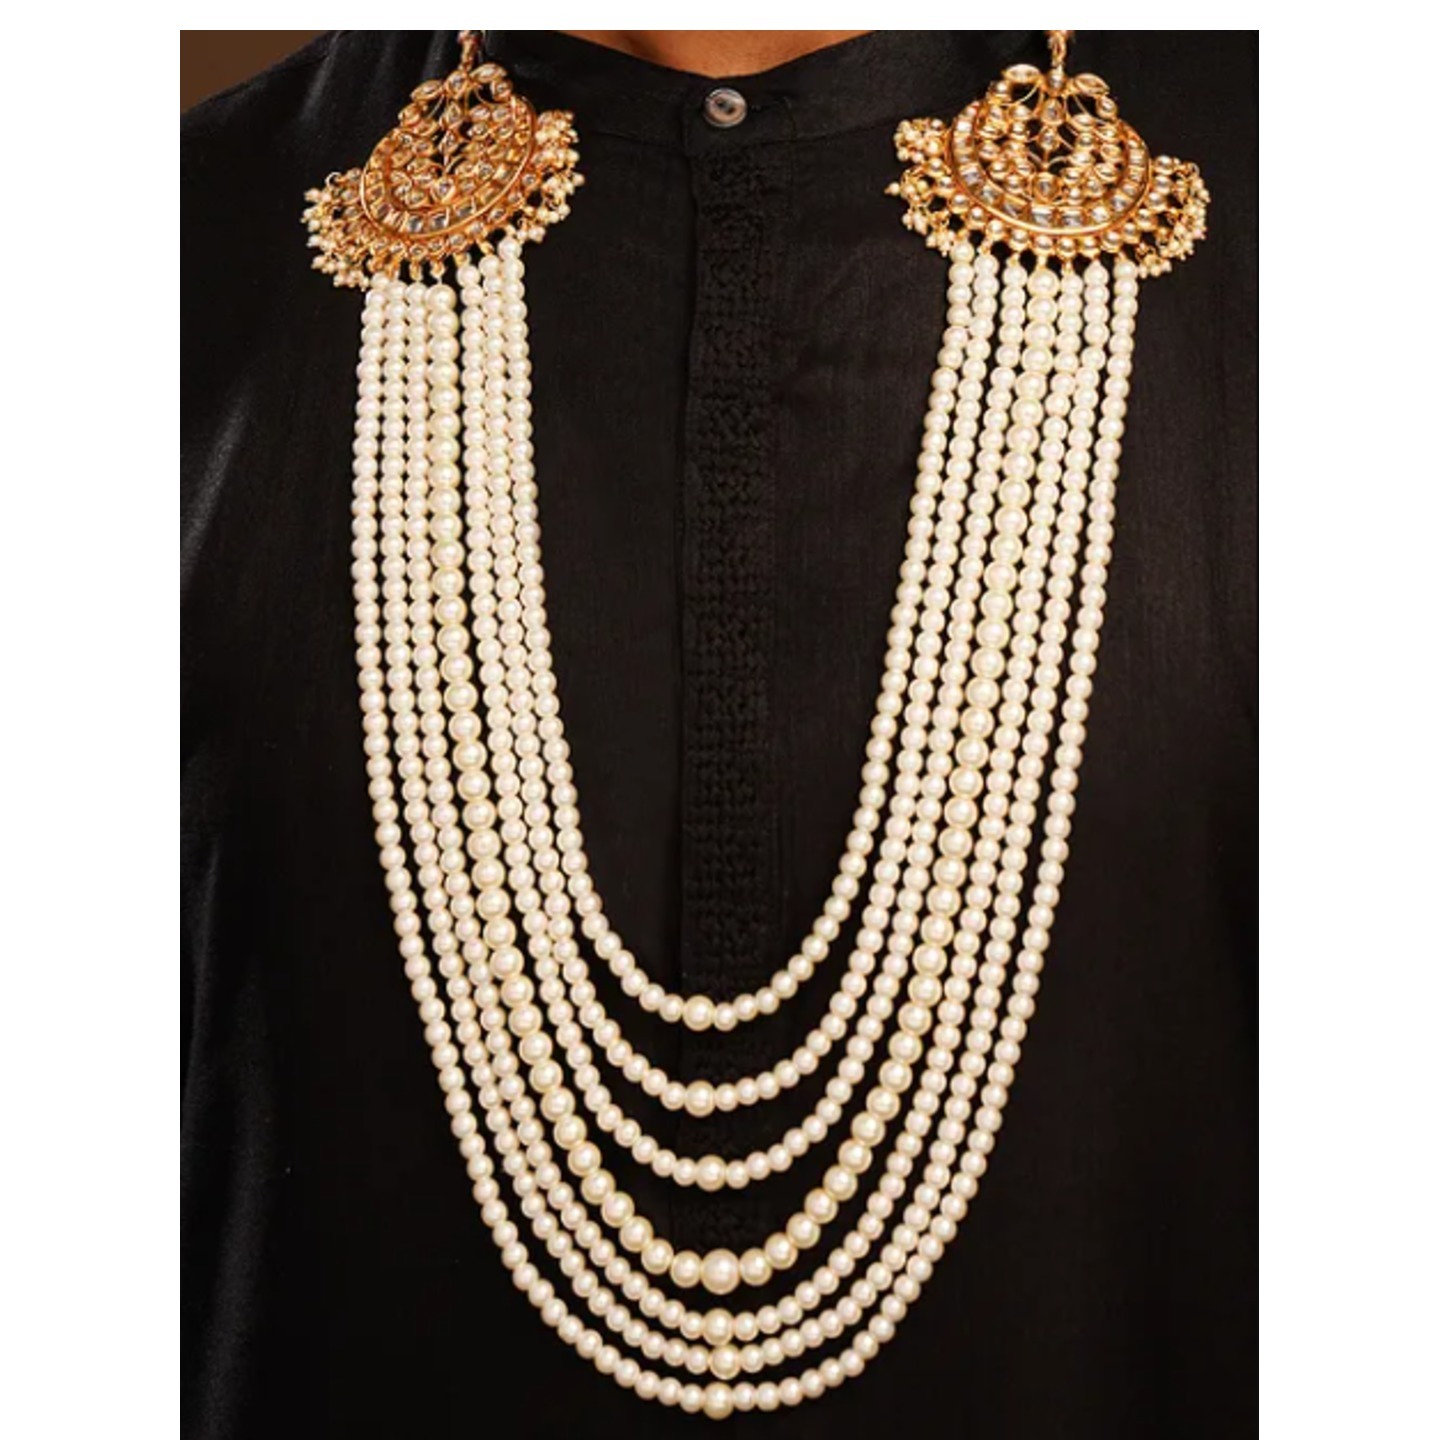 White Beaded Layered Necklace With Pearls For Men 